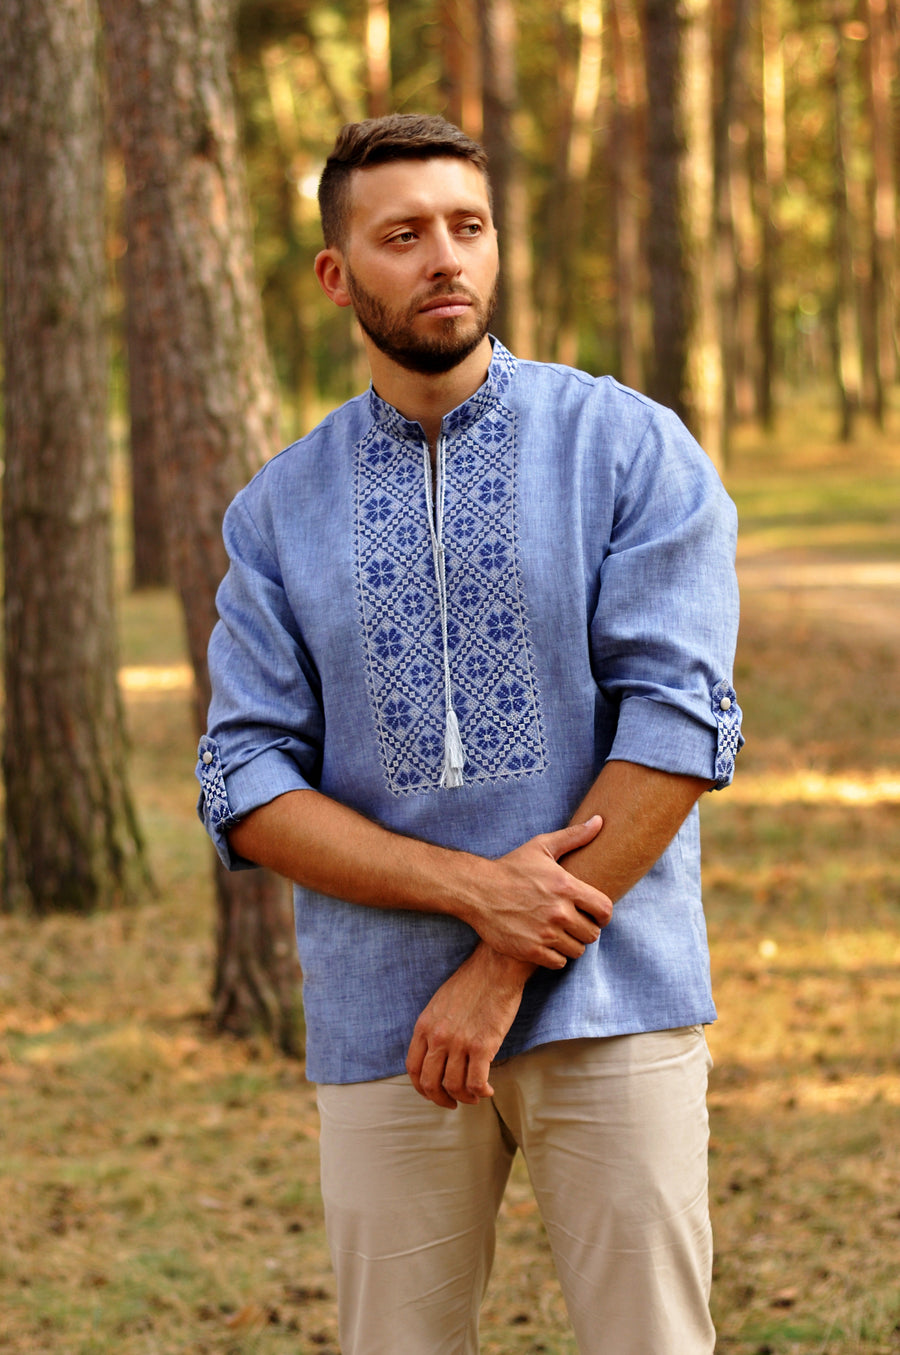 Embroidered men's shirt in denim style